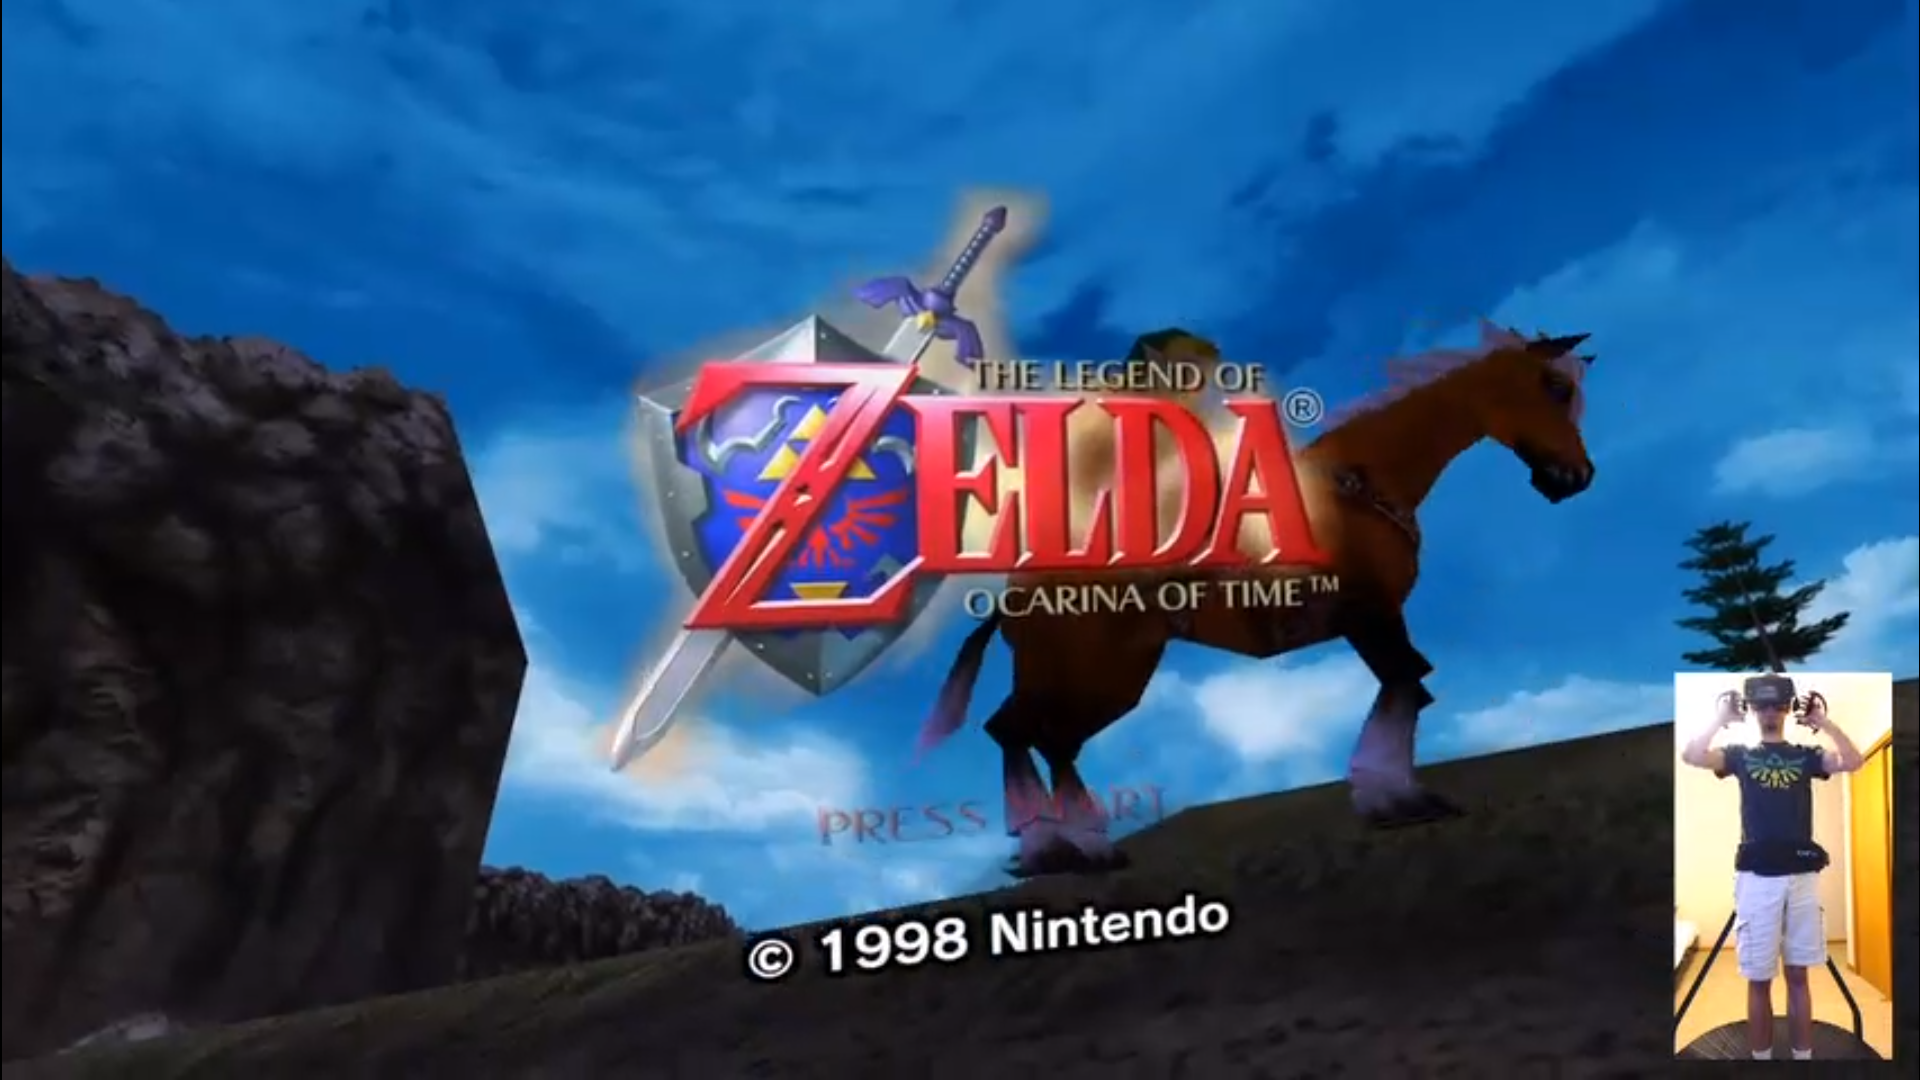 The Legend of Zelda: Ocarina of Time Master Quest - Dolphin